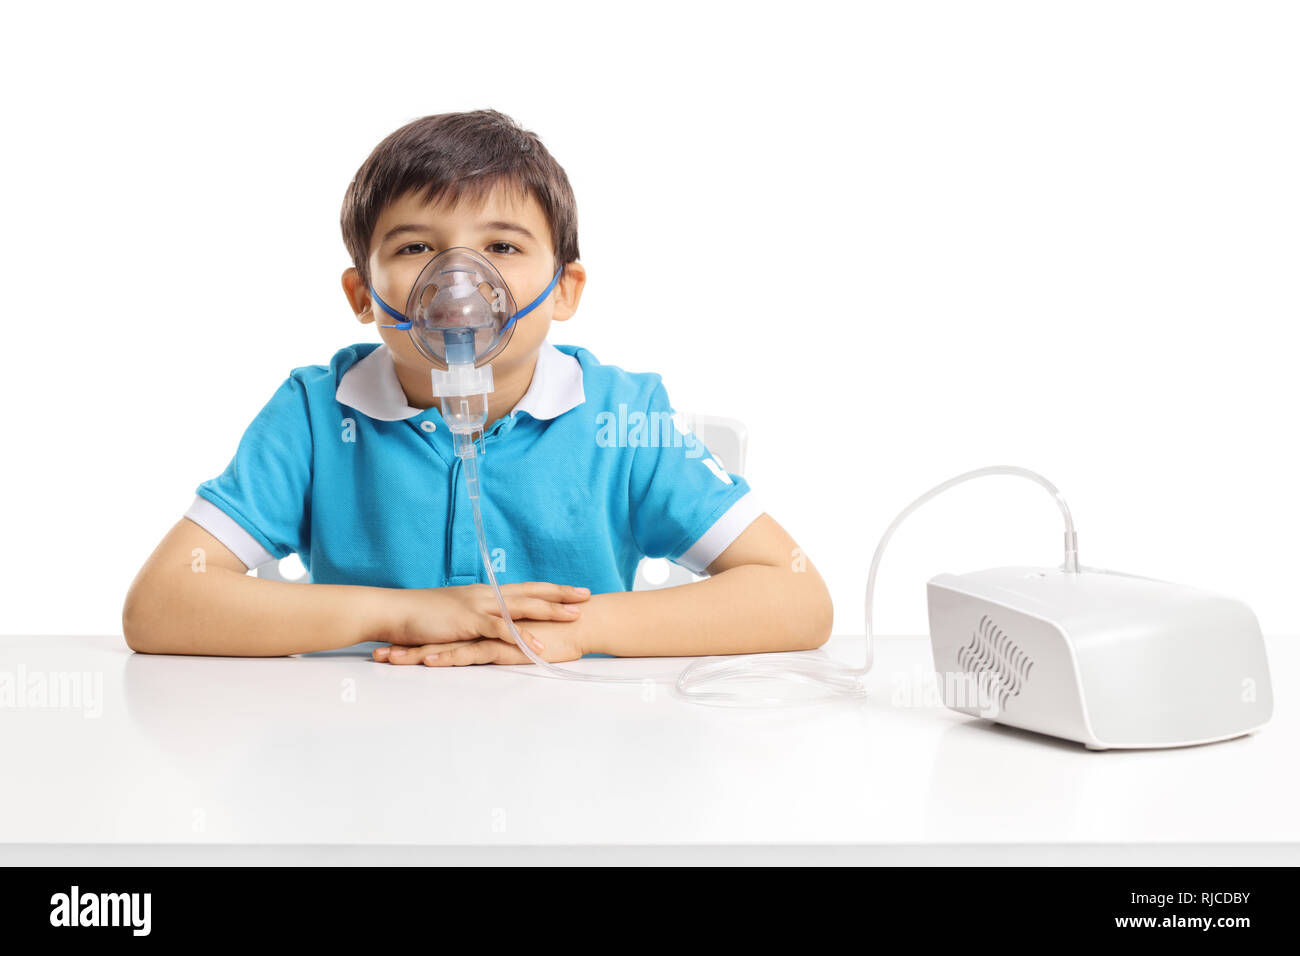 Boy sitting at a table with inhaling mask isolated on white background Stock Photo